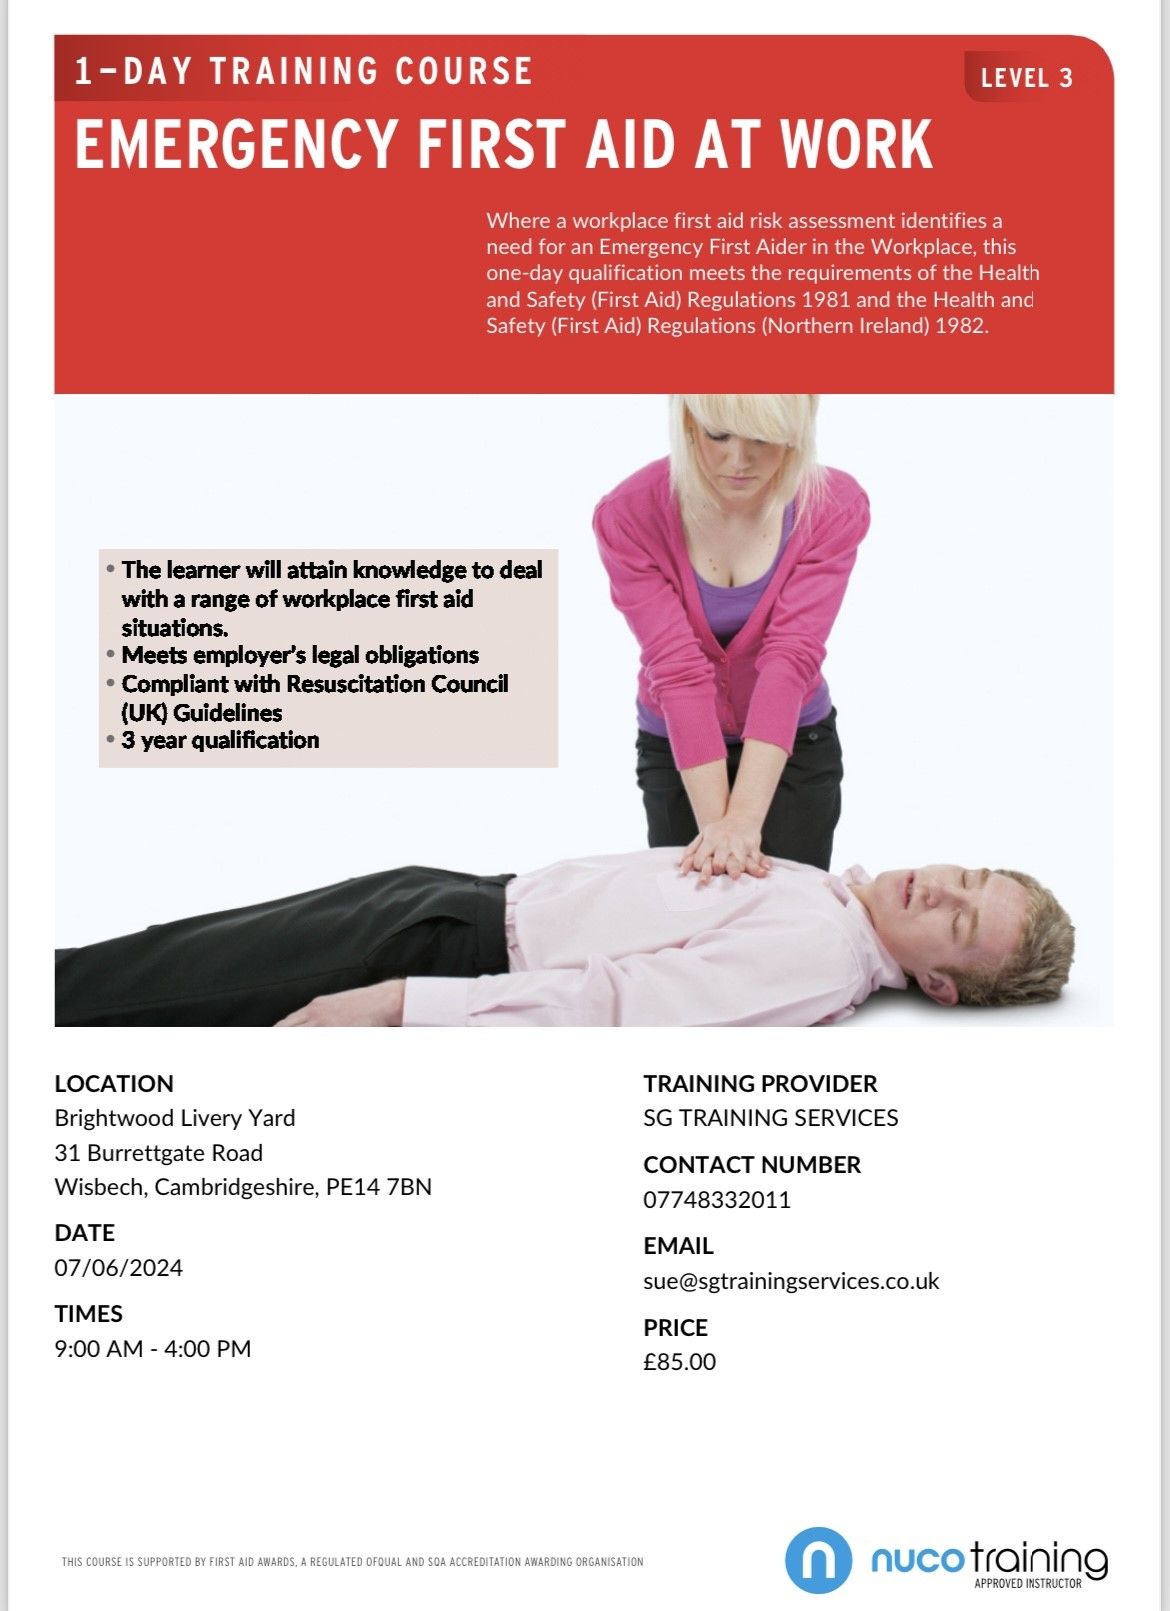 1 Day - Emergency First Aid at work Level 3